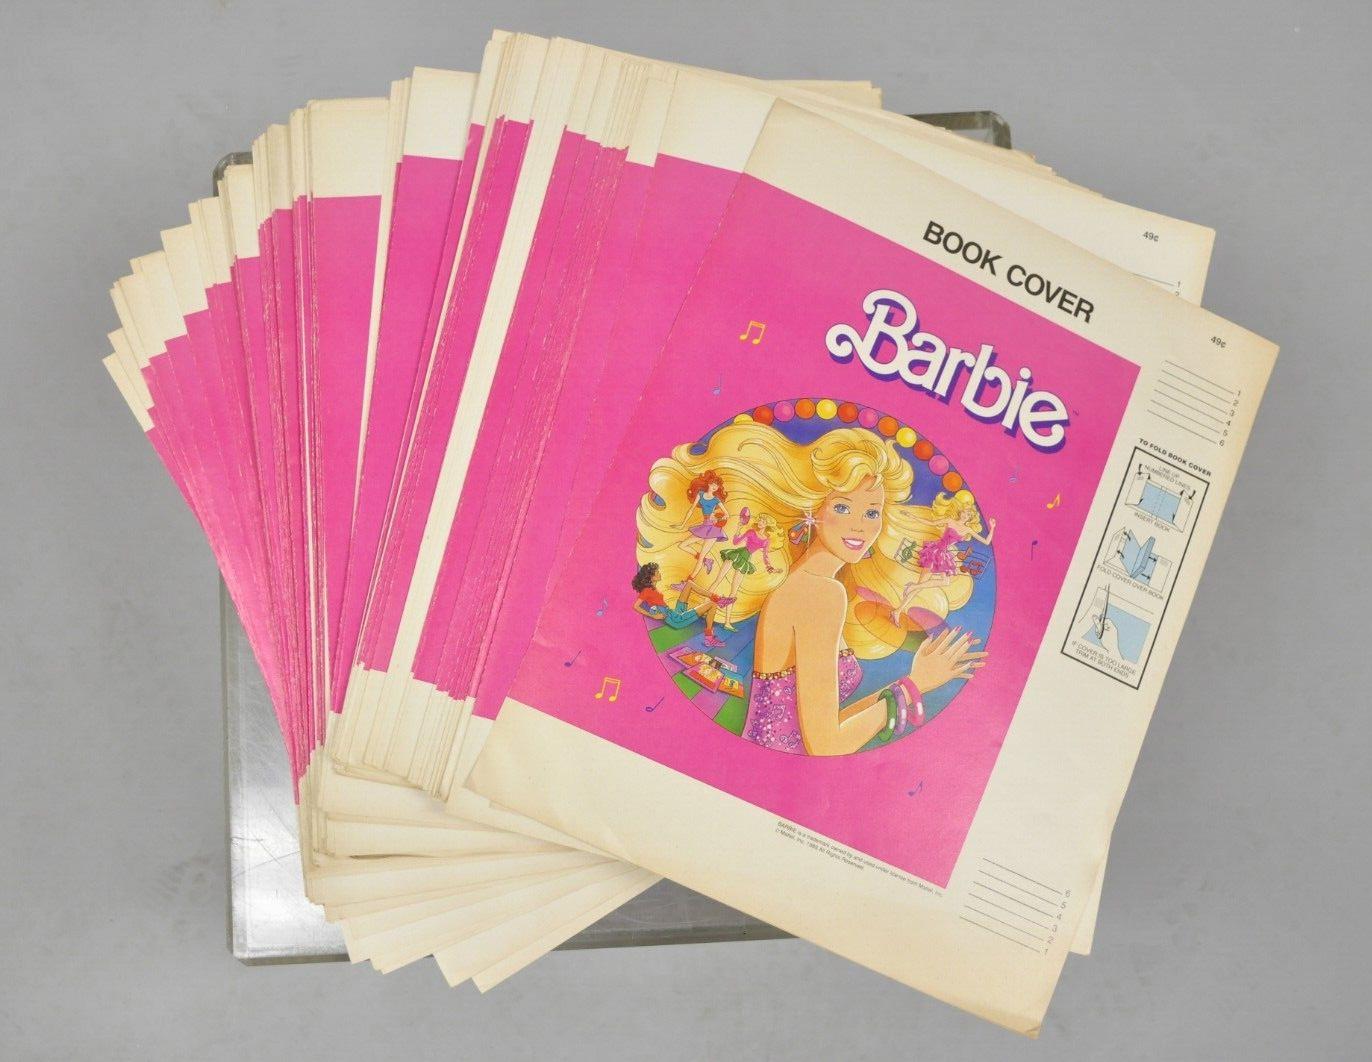 Vintage 1989 Barbie Mattel Original Pink Paper Book Covers NOS - Many Available For Sale 2